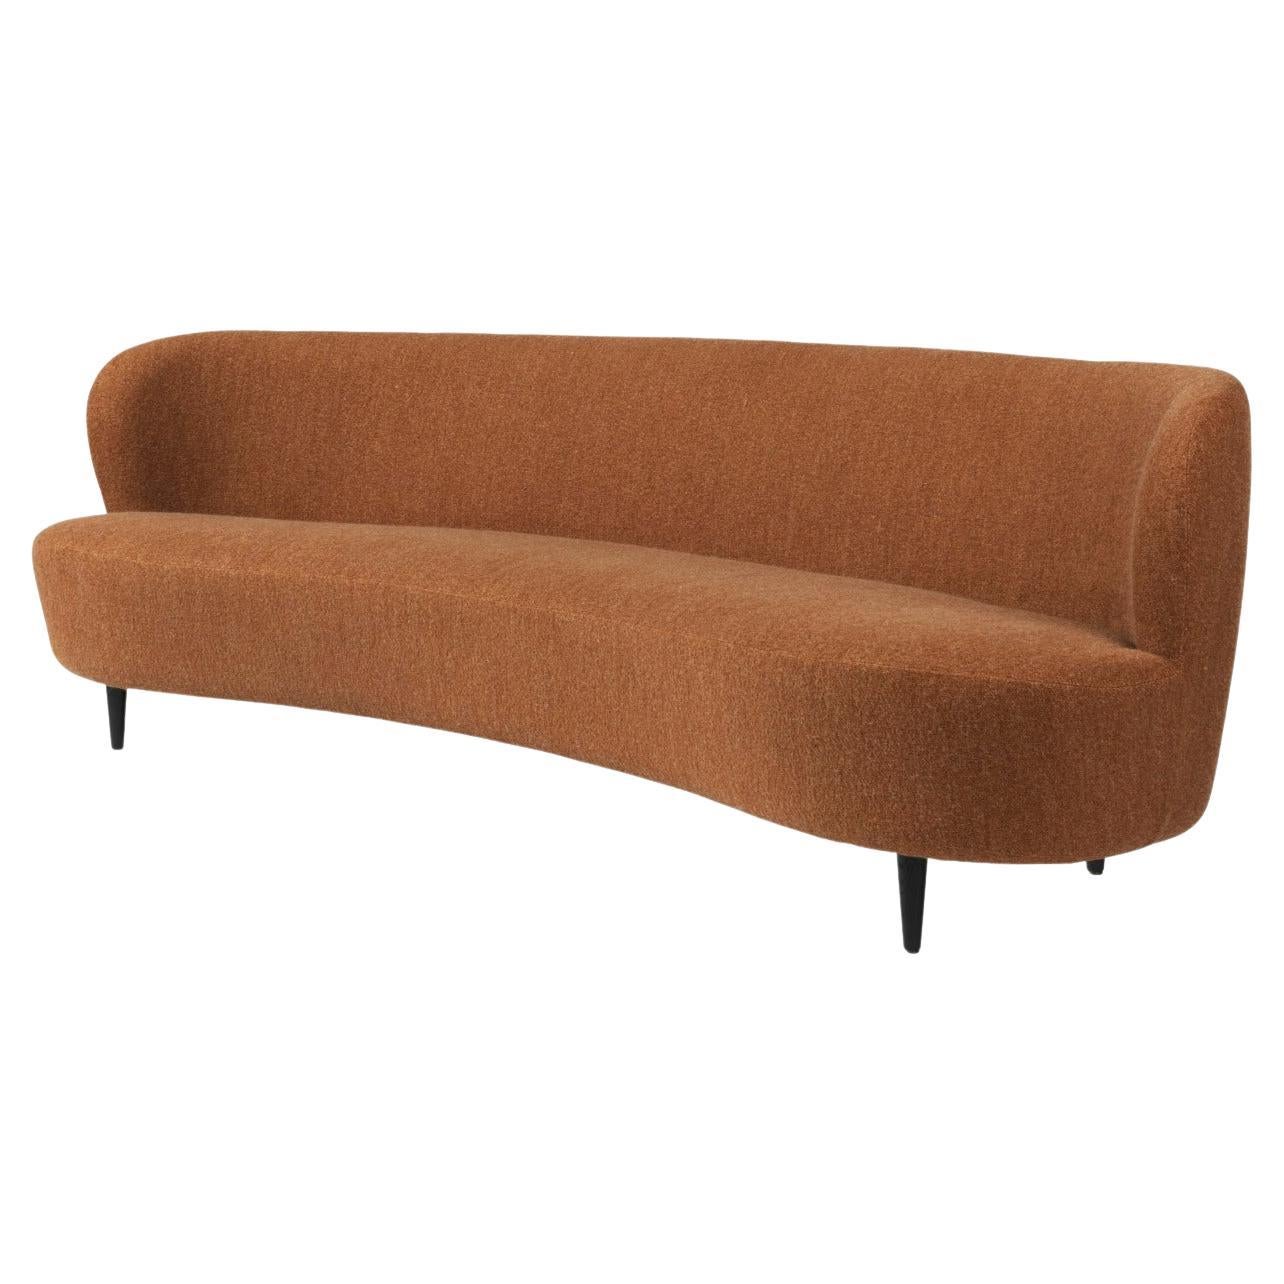 Stay here, stay with me, stay relaxed, stay and read...The Stay Sofa has a sculptural and organic shape that, besides giving a contemporary look, also embraces the user and encourages to stay seated. The characteristic shape is almost like a